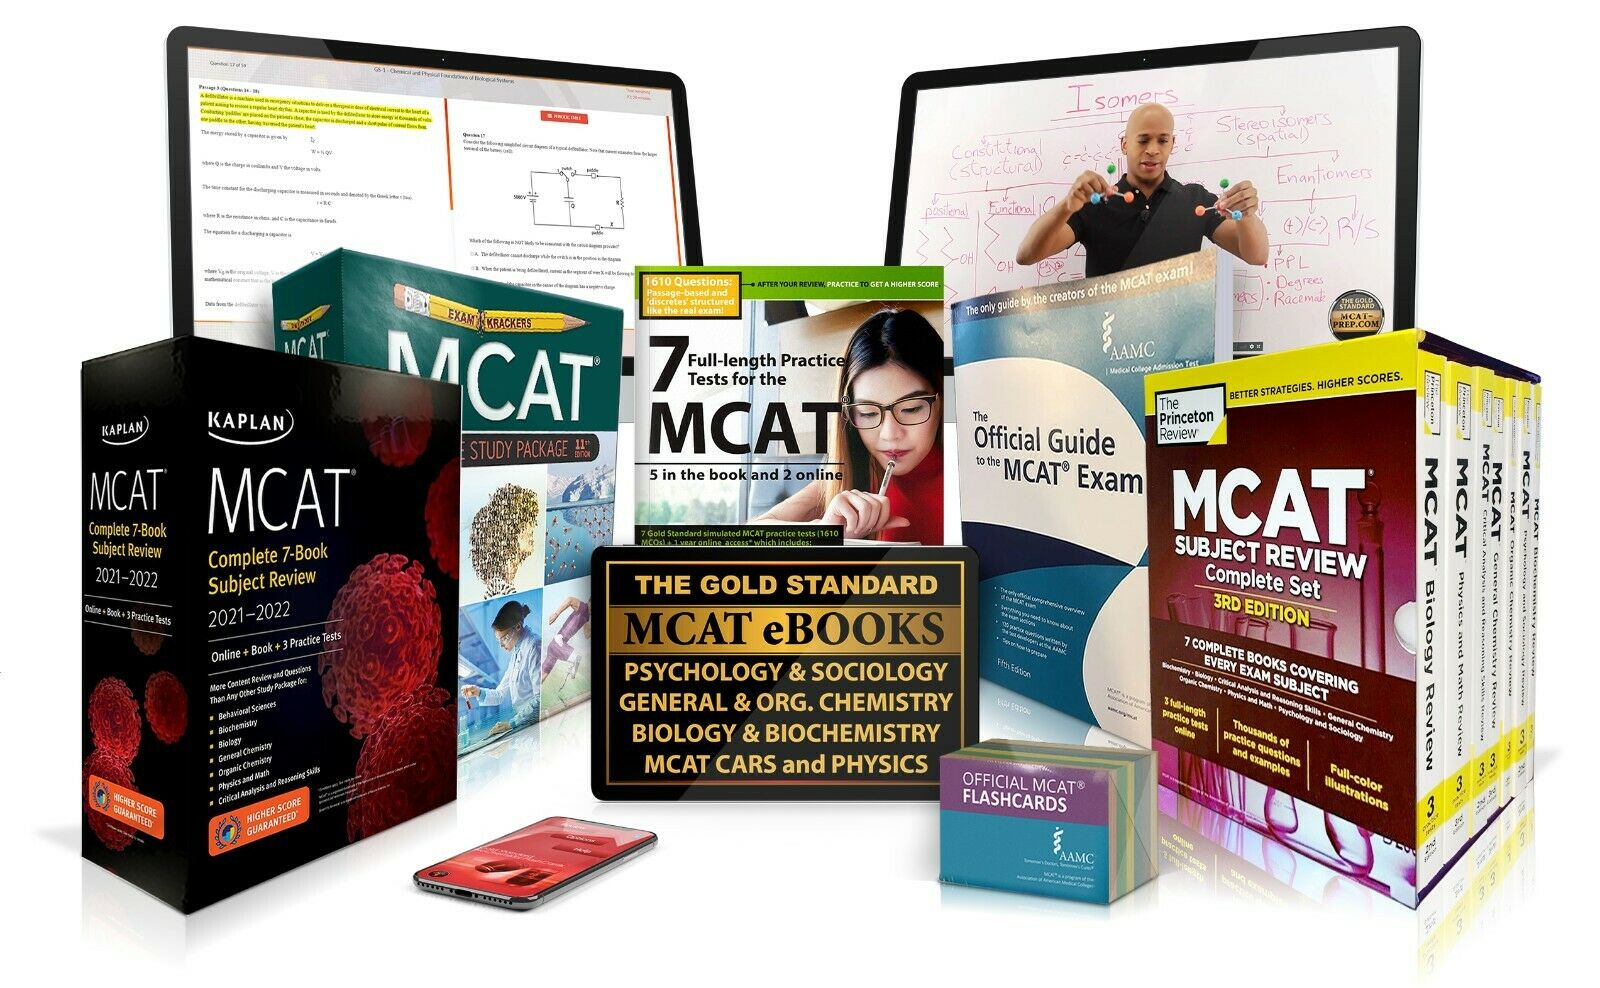 MCAT Prep for the 2021-22 Exam: Complete Home Study Package with AAMC materials